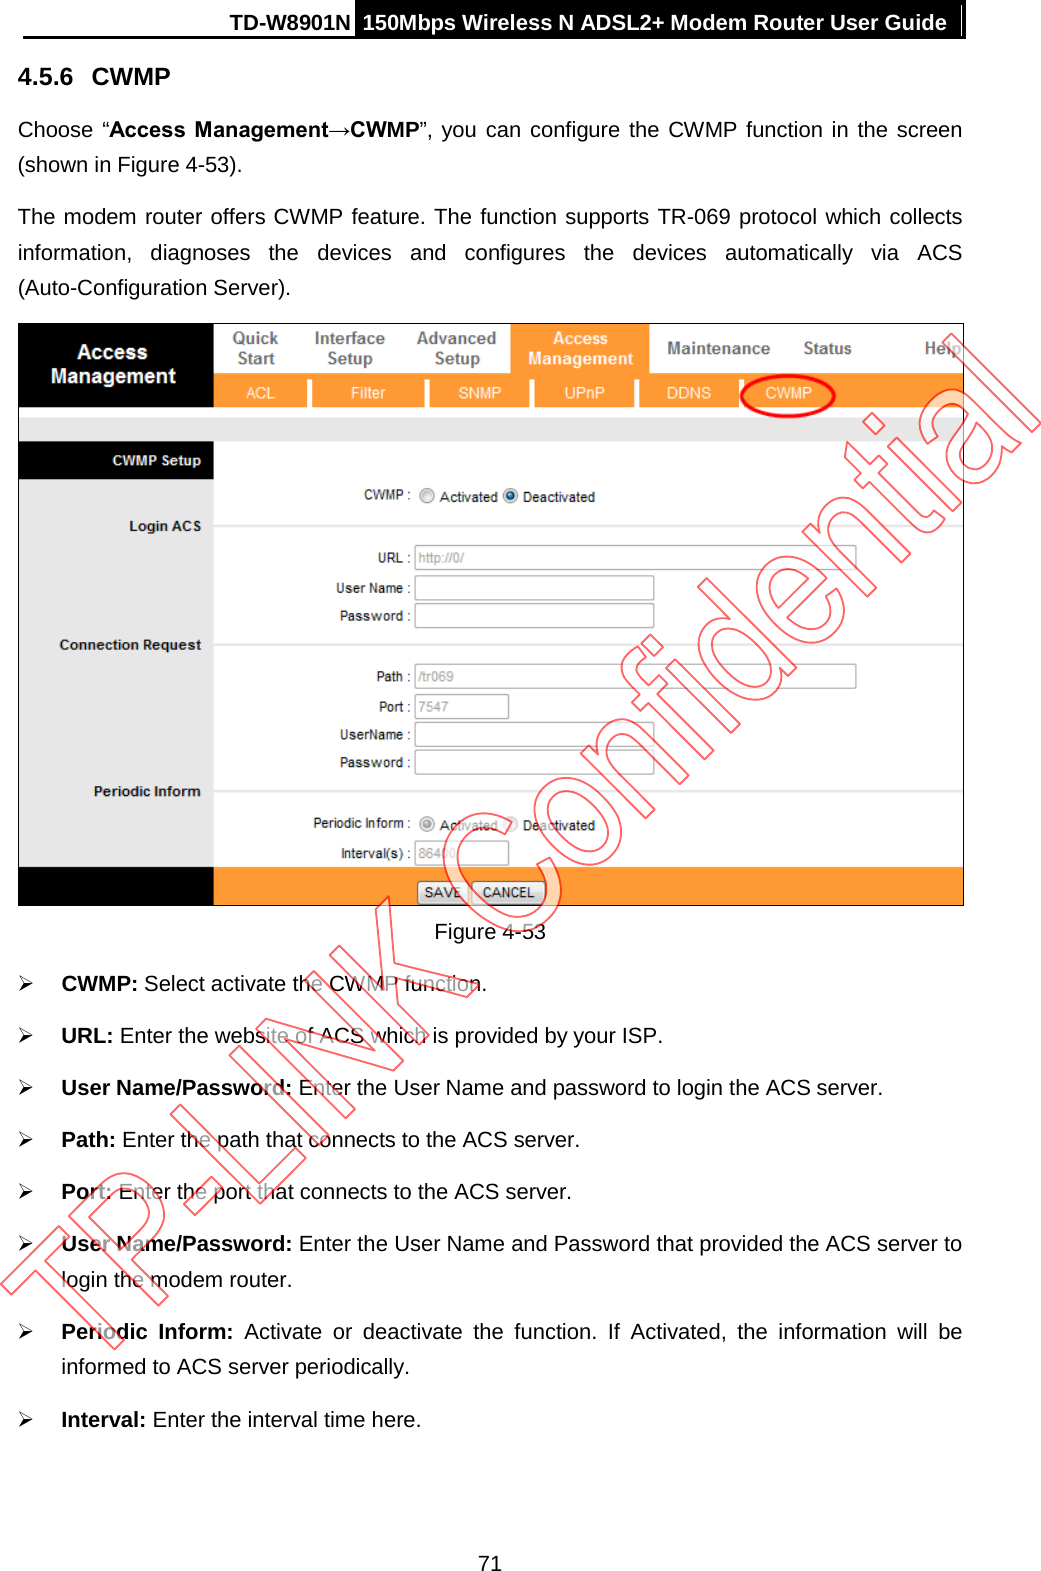 TD-W8901N 150Mbps Wireless N ADSL2+ Modem Router User Guide  4.5.6 CWMP Choose “Access Management→CWMP”, you can configure the CWMP function in the screen (shown in Figure 4-53). The modem router offers CWMP feature. The function supports TR-069 protocol which collects information, diagnoses the devices and configures the devices automatically via ACS (Auto-Configuration Server).  Figure 4-53  CWMP: Select activate the CWMP function.  URL: Enter the website of ACS which is provided by your ISP.  User Name/Password: Enter the User Name and password to login the ACS server.  Path: Enter the path that connects to the ACS server.  Port: Enter the port that connects to the ACS server.  User Name/Password: Enter the User Name and Password that provided the ACS server to login the modem router.  Periodic Inform: Activate or deactivate the function. If Activated, the information will be informed to ACS server periodically.  Interval: Enter the interval time here. 71 